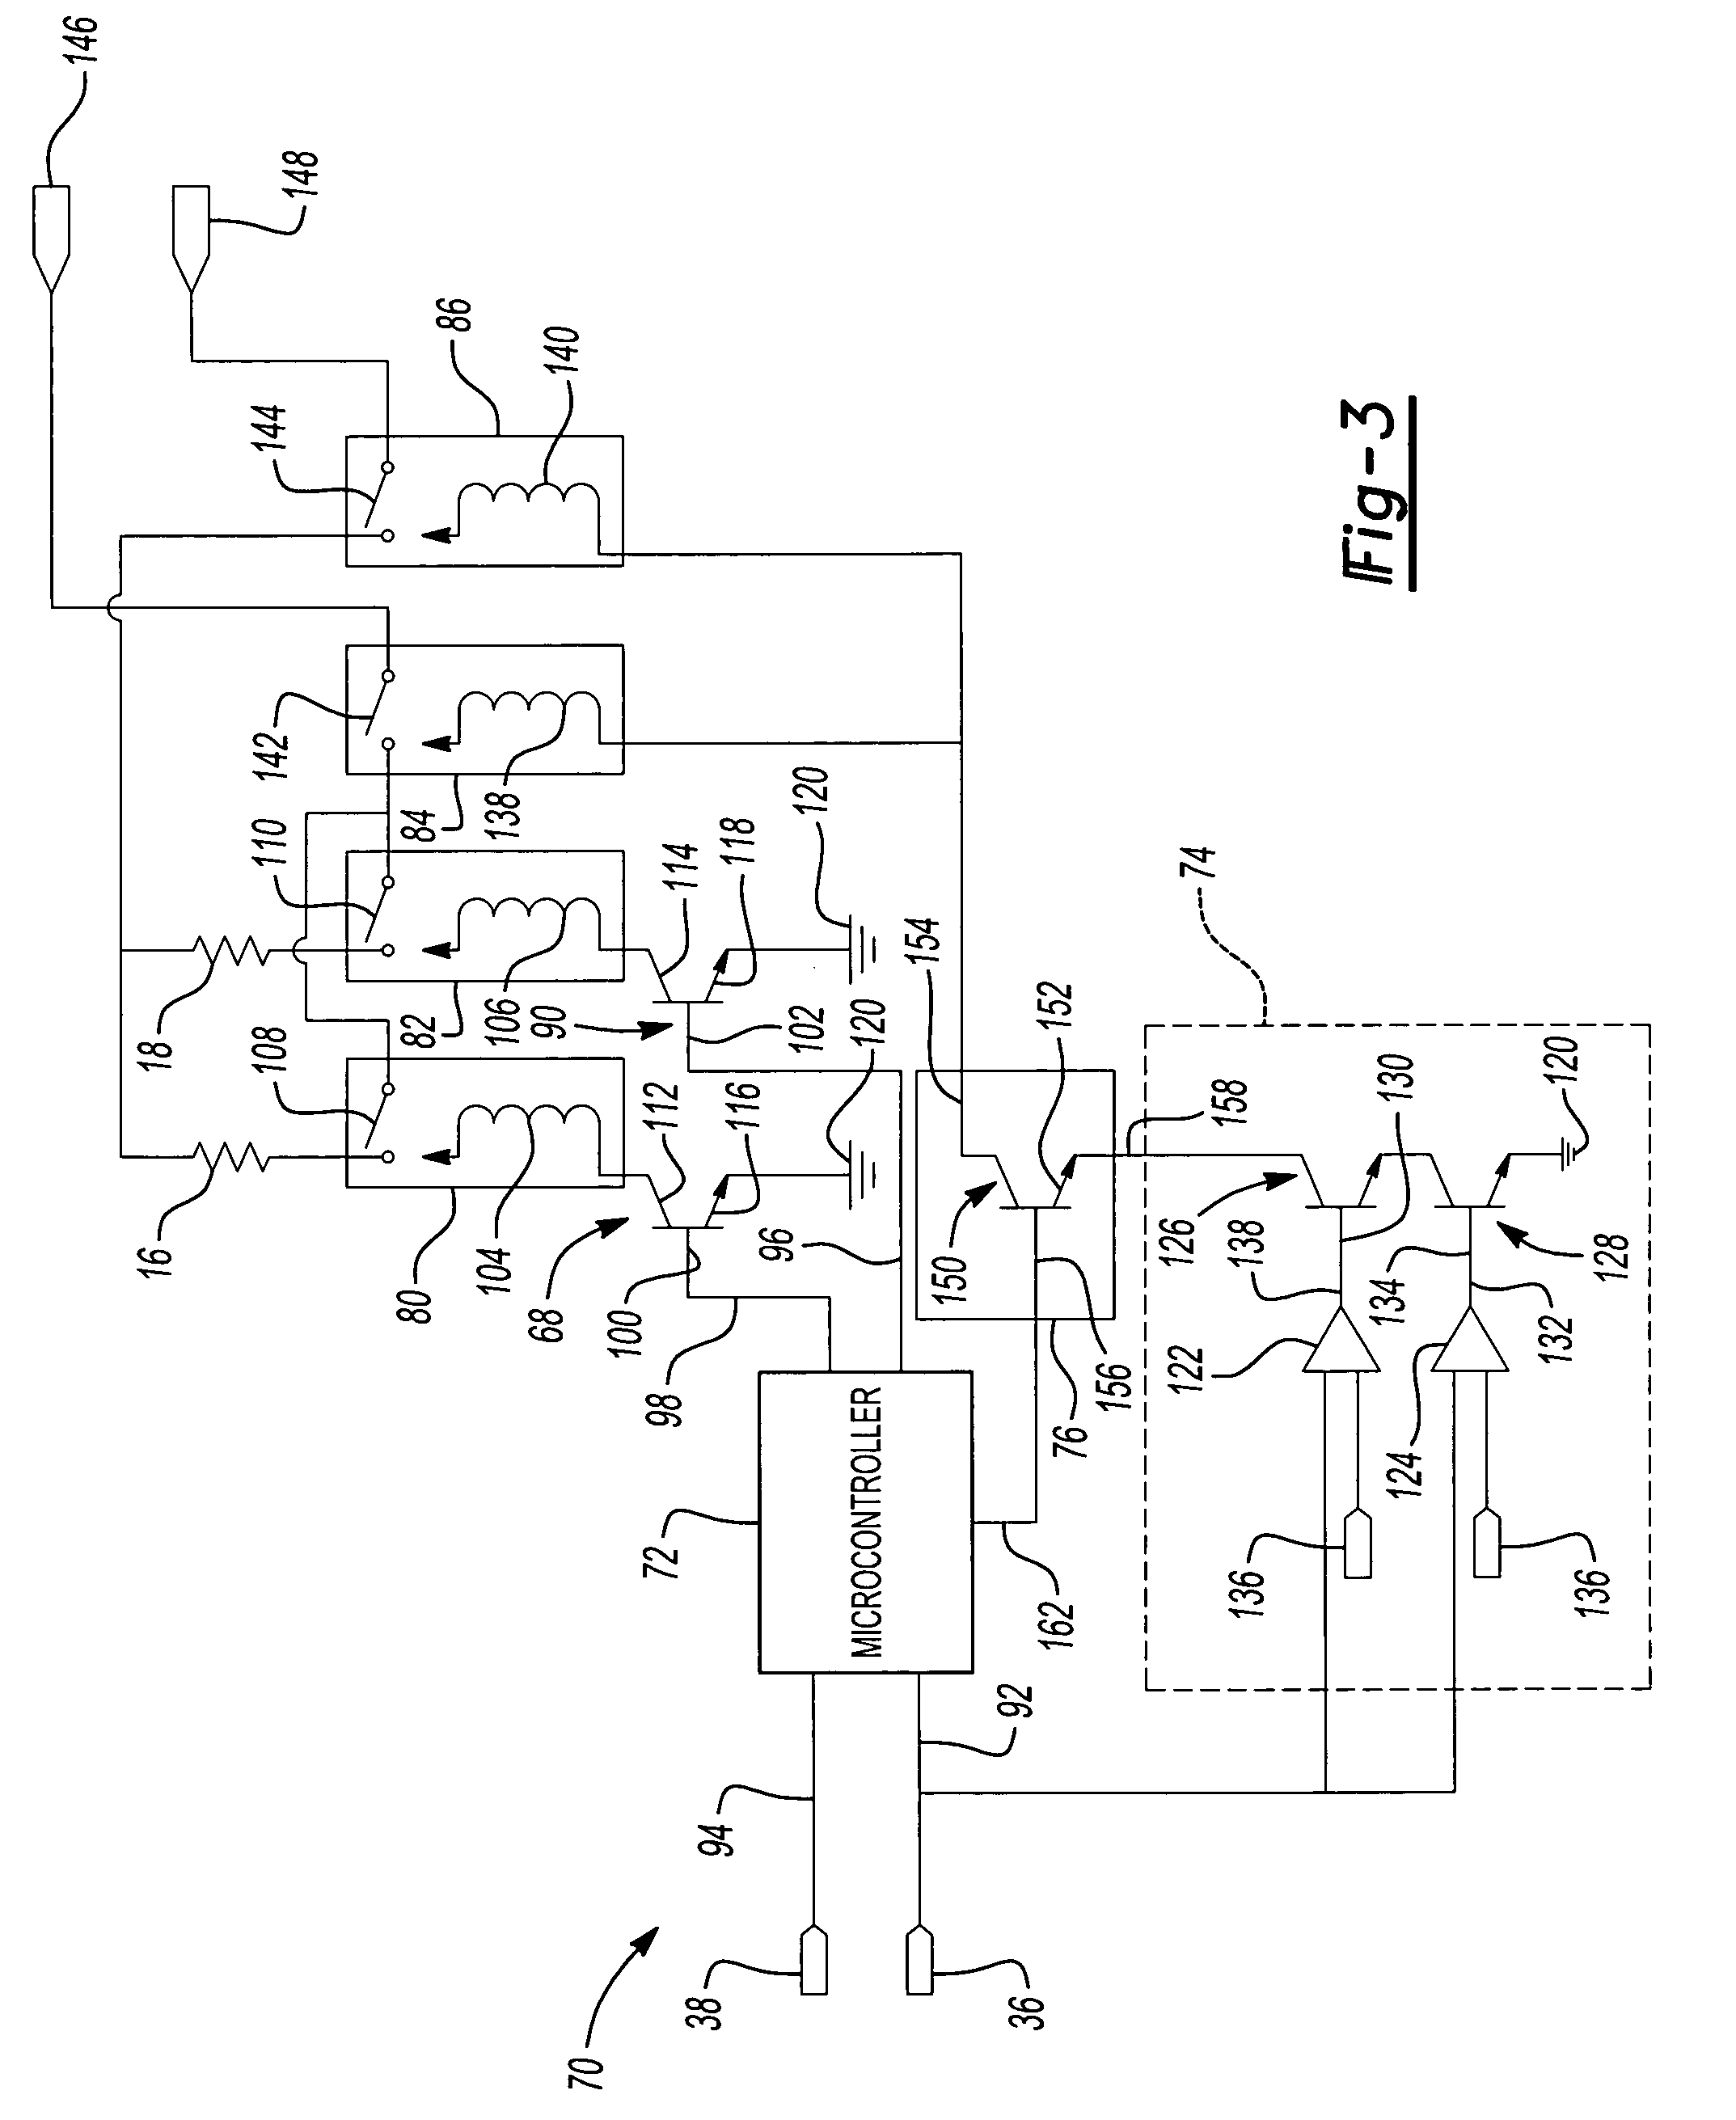 Control and method for operating an electric water heater